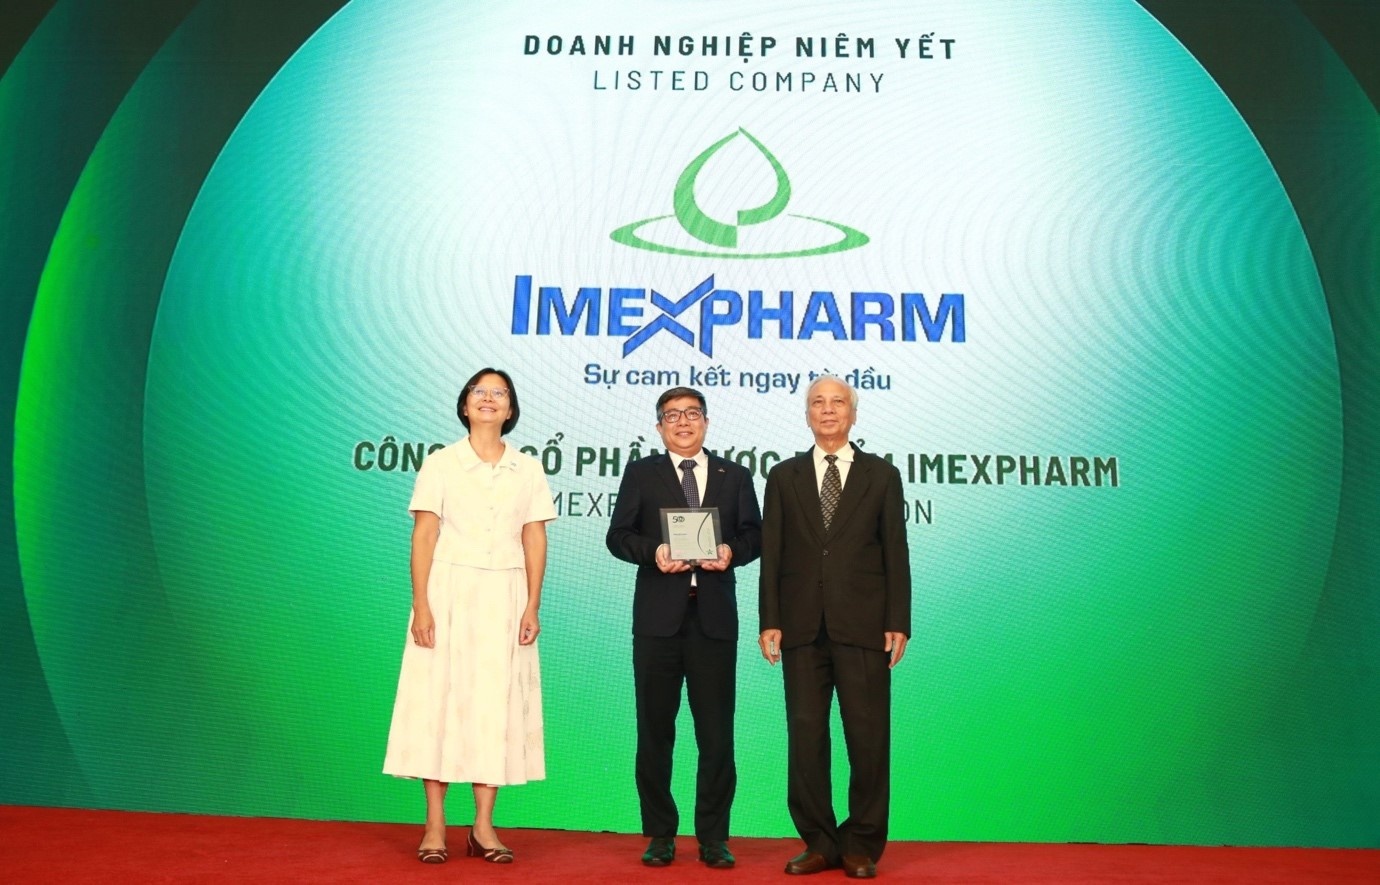 Imexpharm recognised again at Top 50 Corporate Sustainability Awards